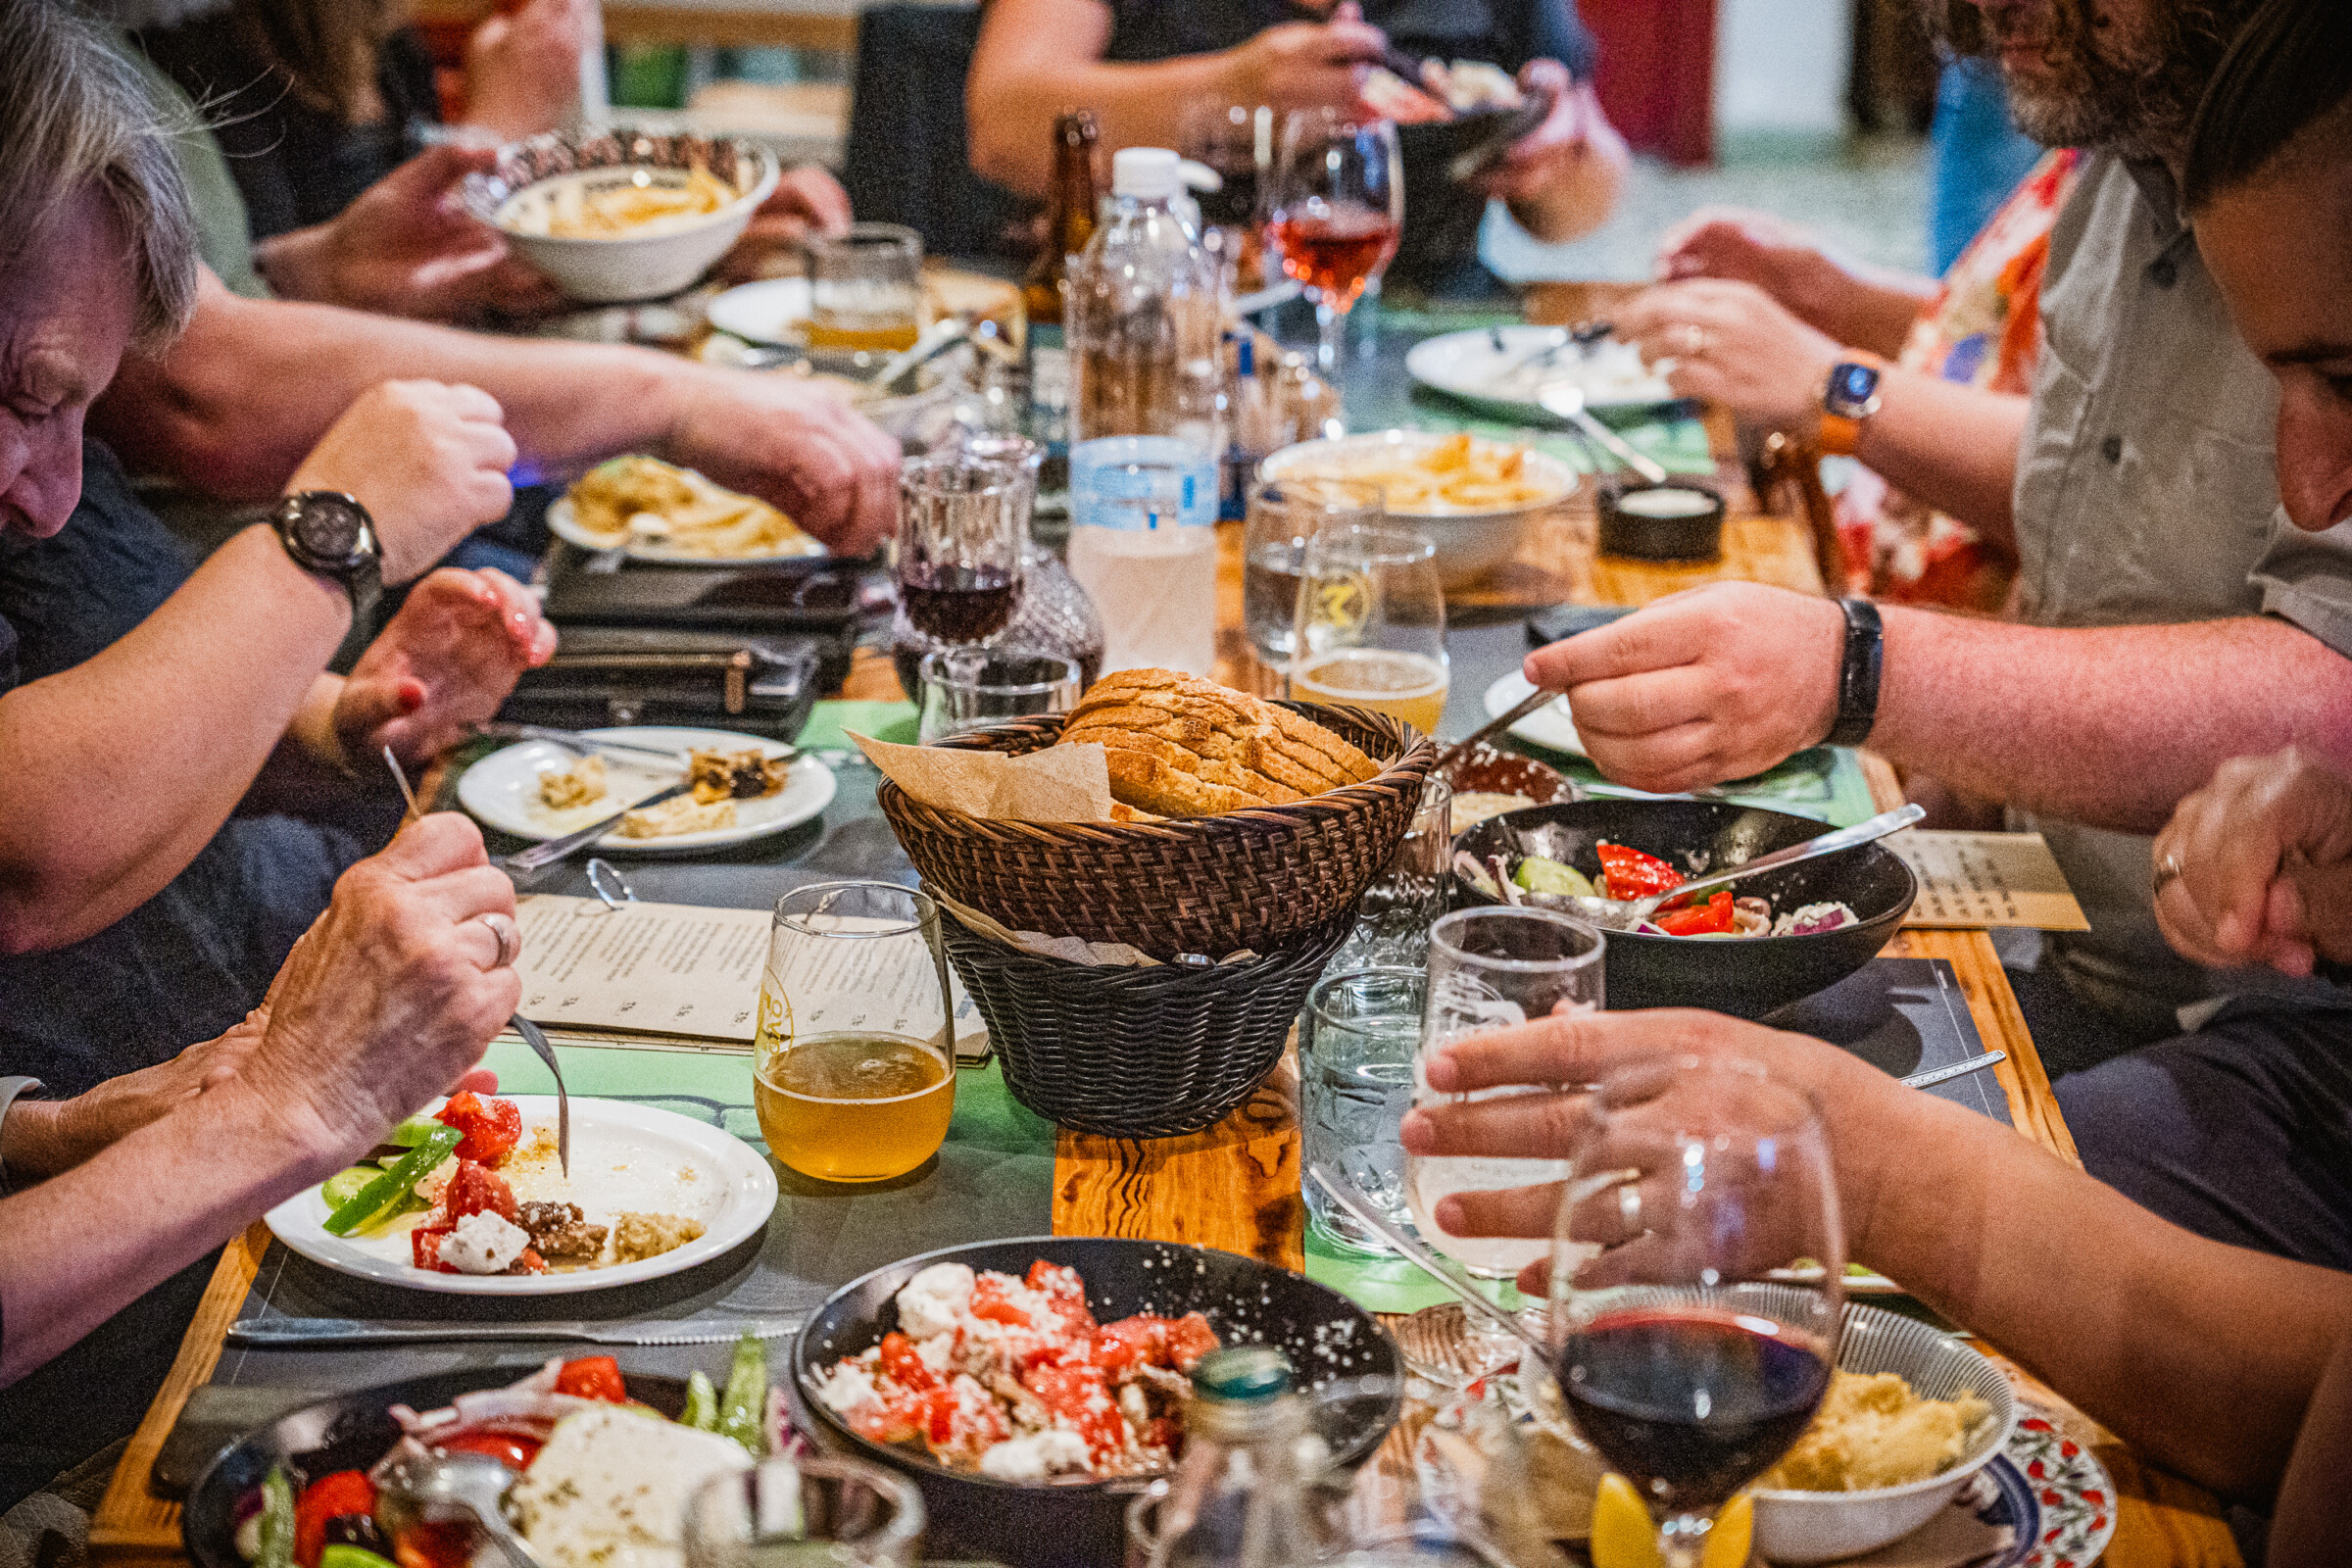 This image shows a long table full of Greek dishes and the hands of several people eating. 